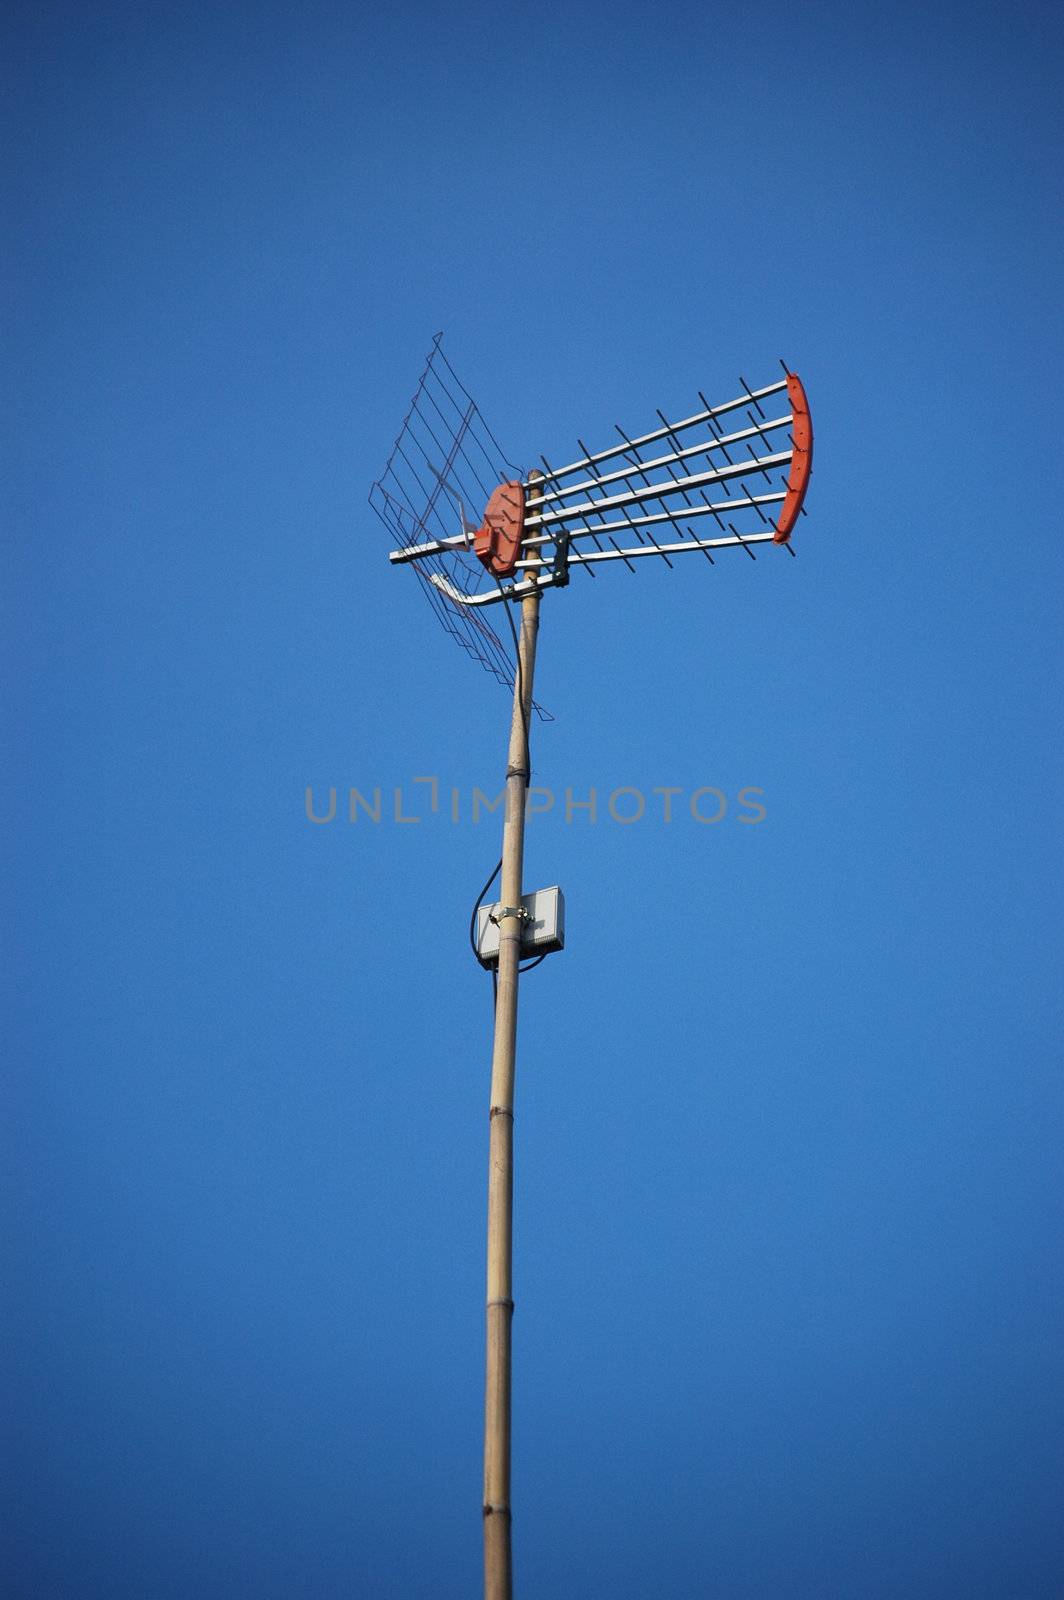 tv antenna that commonly used in home or small office